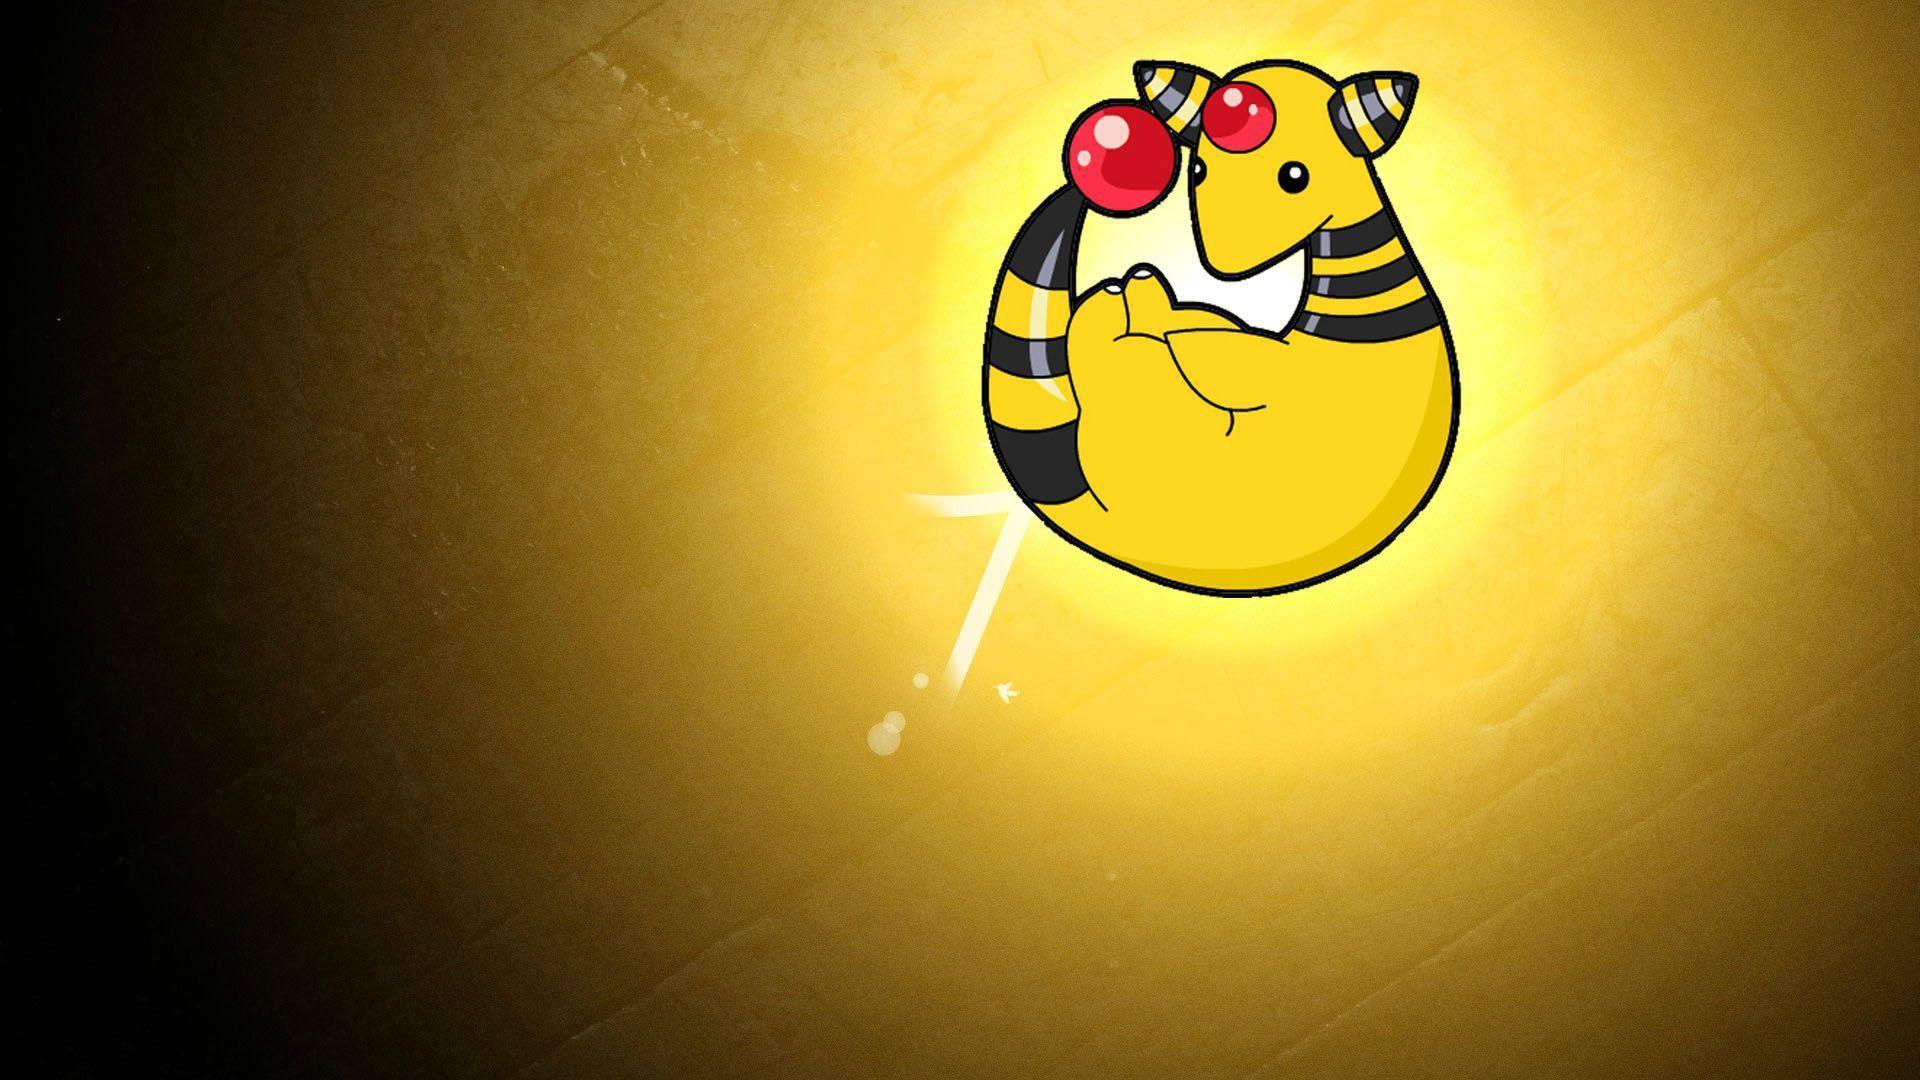 Ampharos Wallpaper Image Photo Picture Background